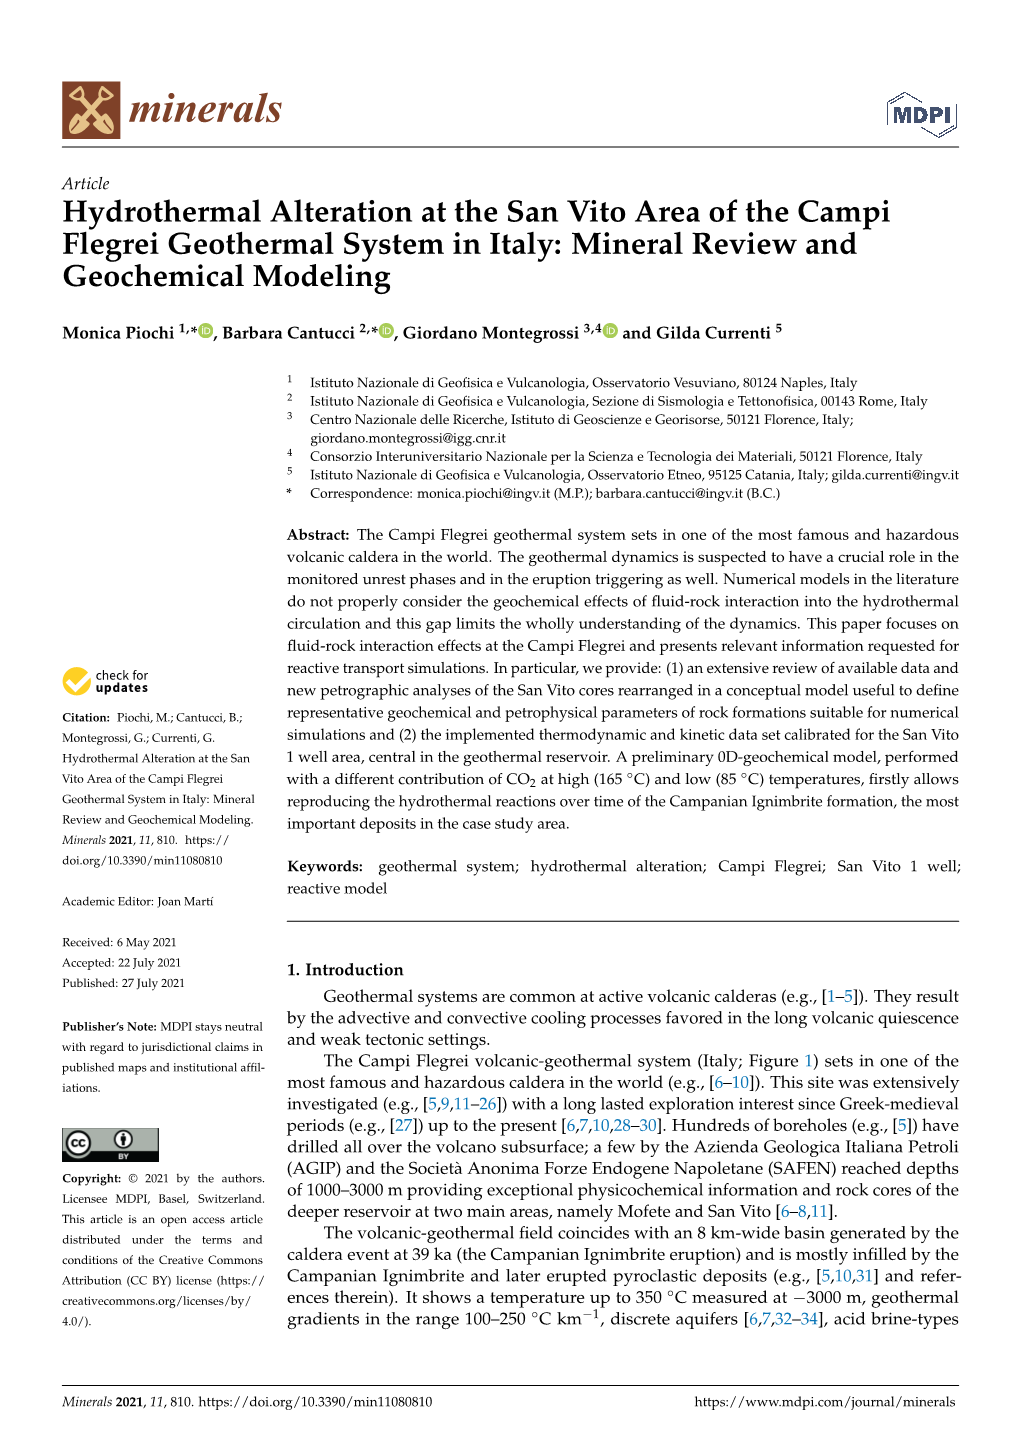 Hydrothermal Alteration at the San Vito Area of the Campi Flegrei Geothermal System in Italy: Mineral Review and Geochemical Modeling